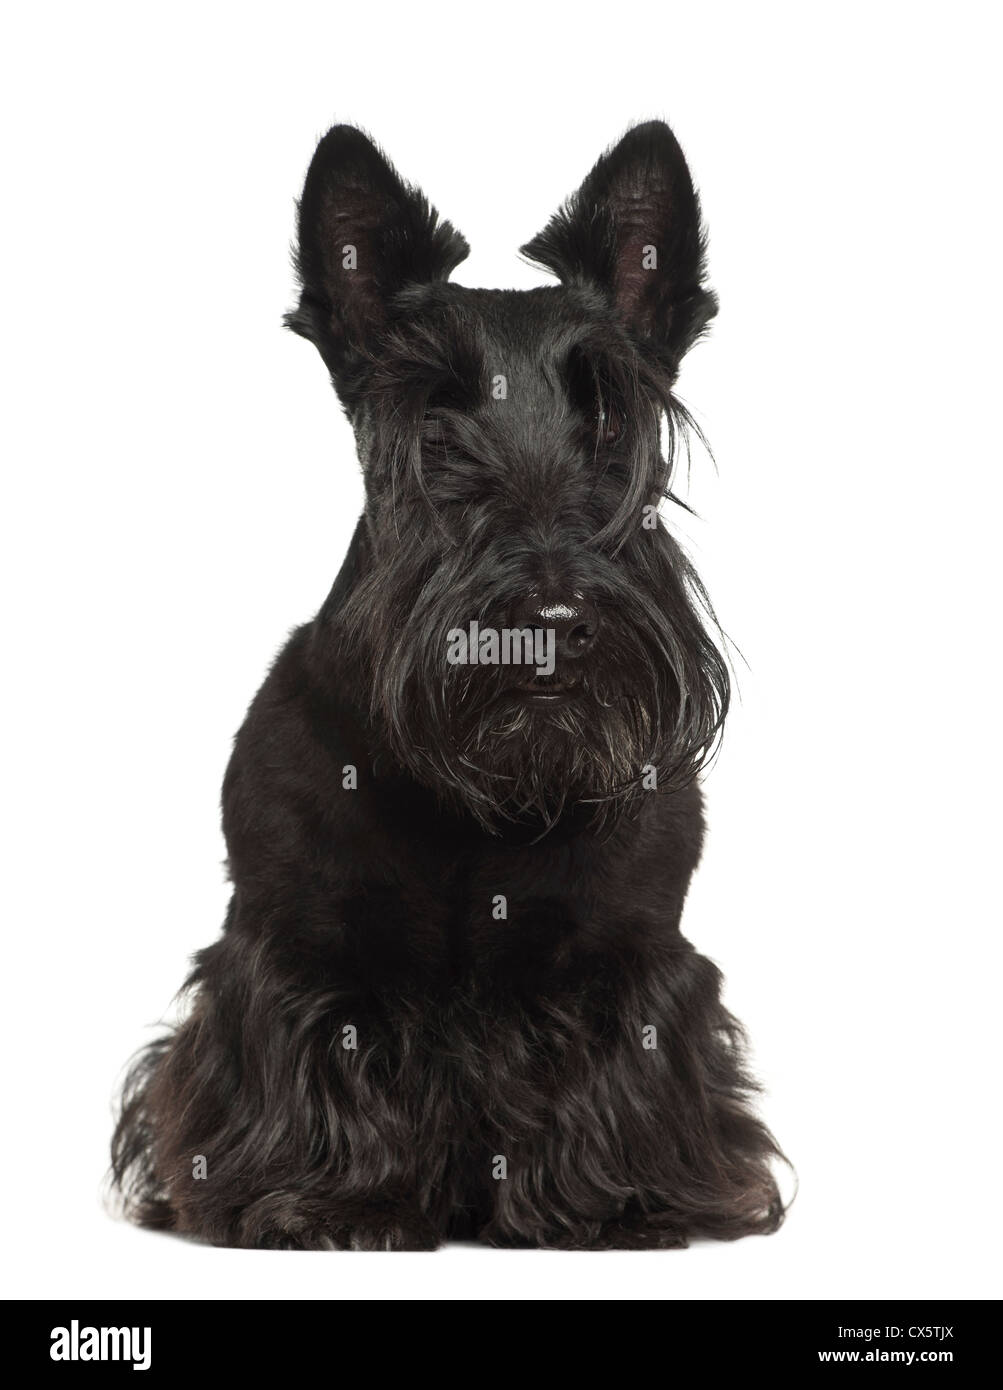 West highland black terrier Cut Out Stock Images & Pictures - Alamy